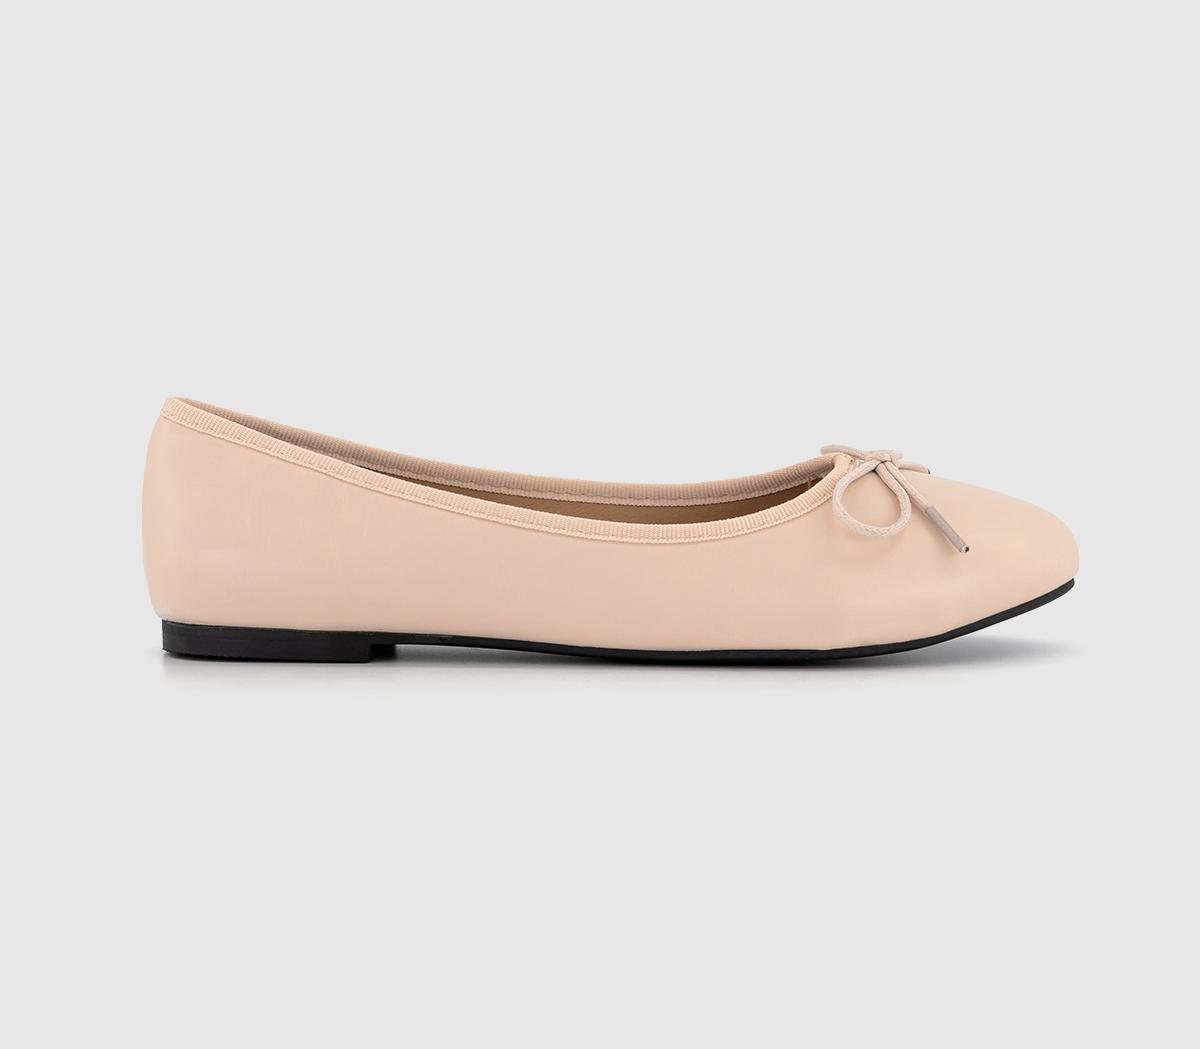 French SoleAmelie Ballet ShoesBeige Leather